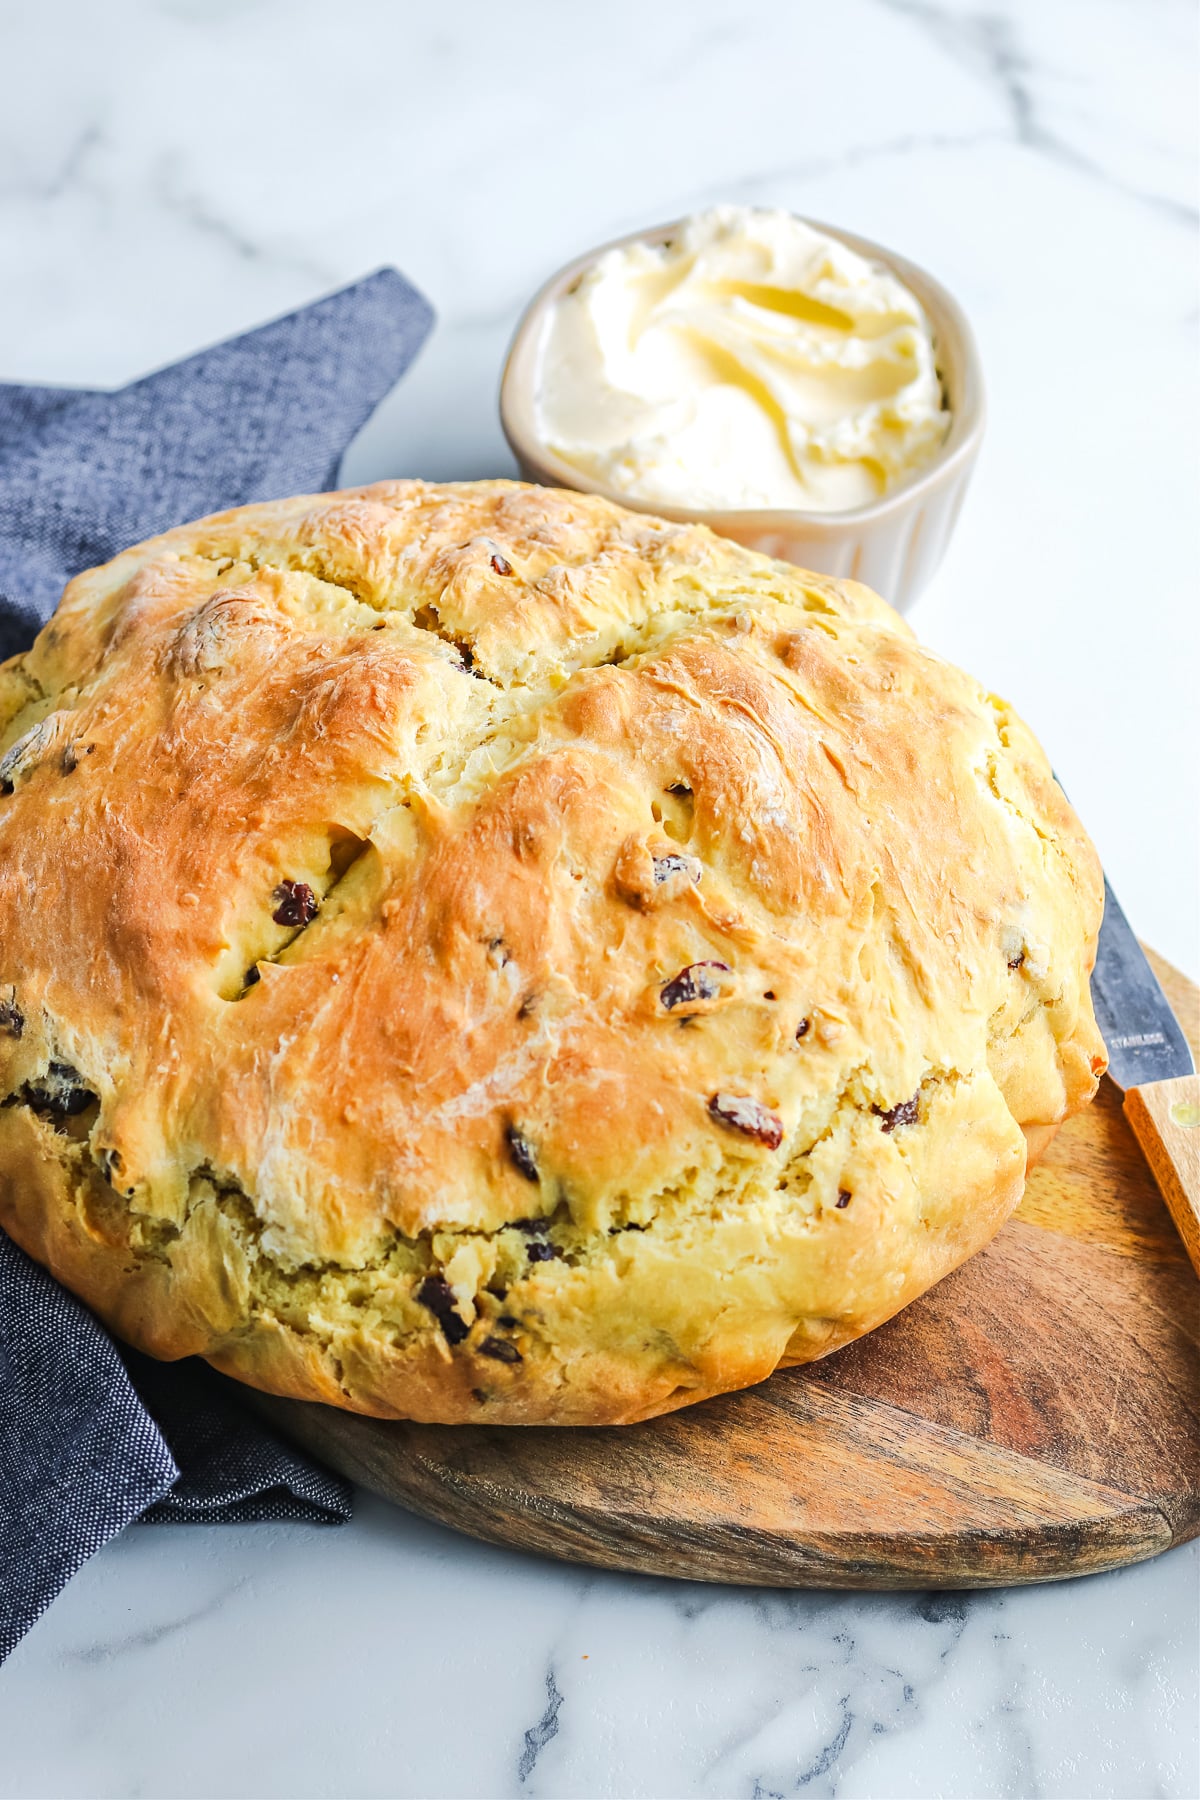 A loaf of Irish soda bread full of raisins sitting on a cutting board next to a small bowl of butter.